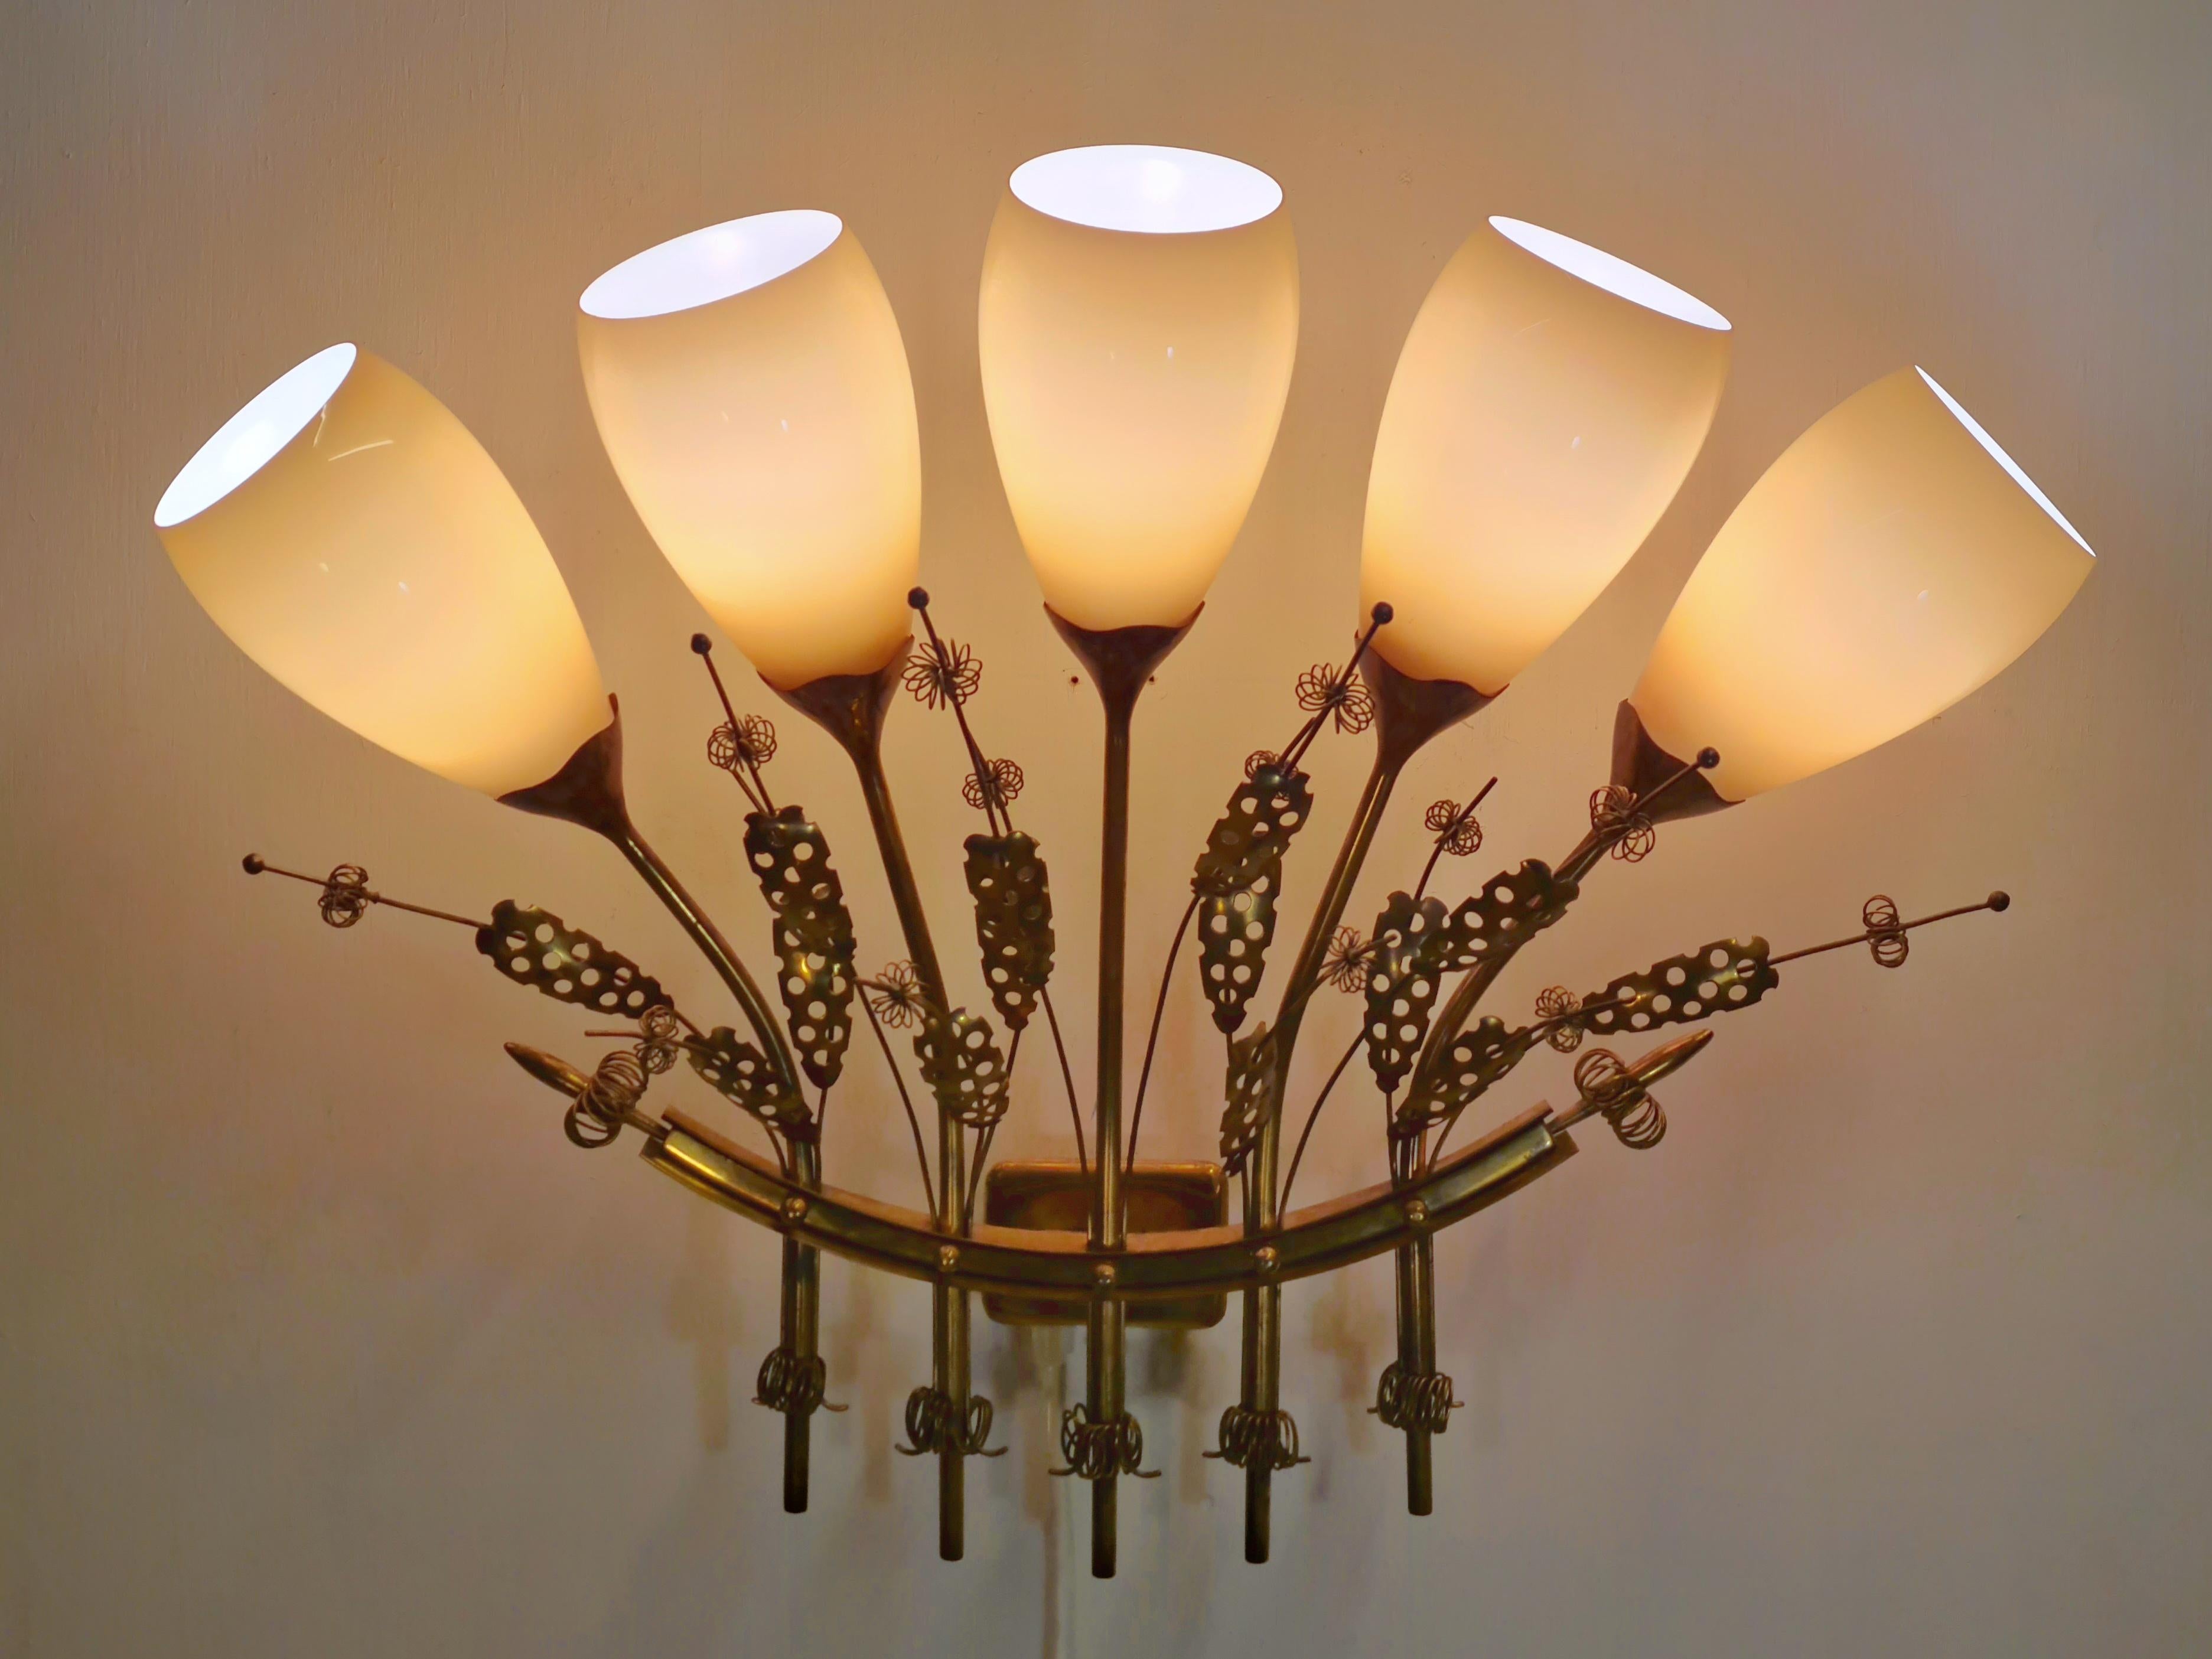 A Pair of Impressive Paavo Tynell Commissioned Wall Lamps, Taito c. 1950s For Sale 9